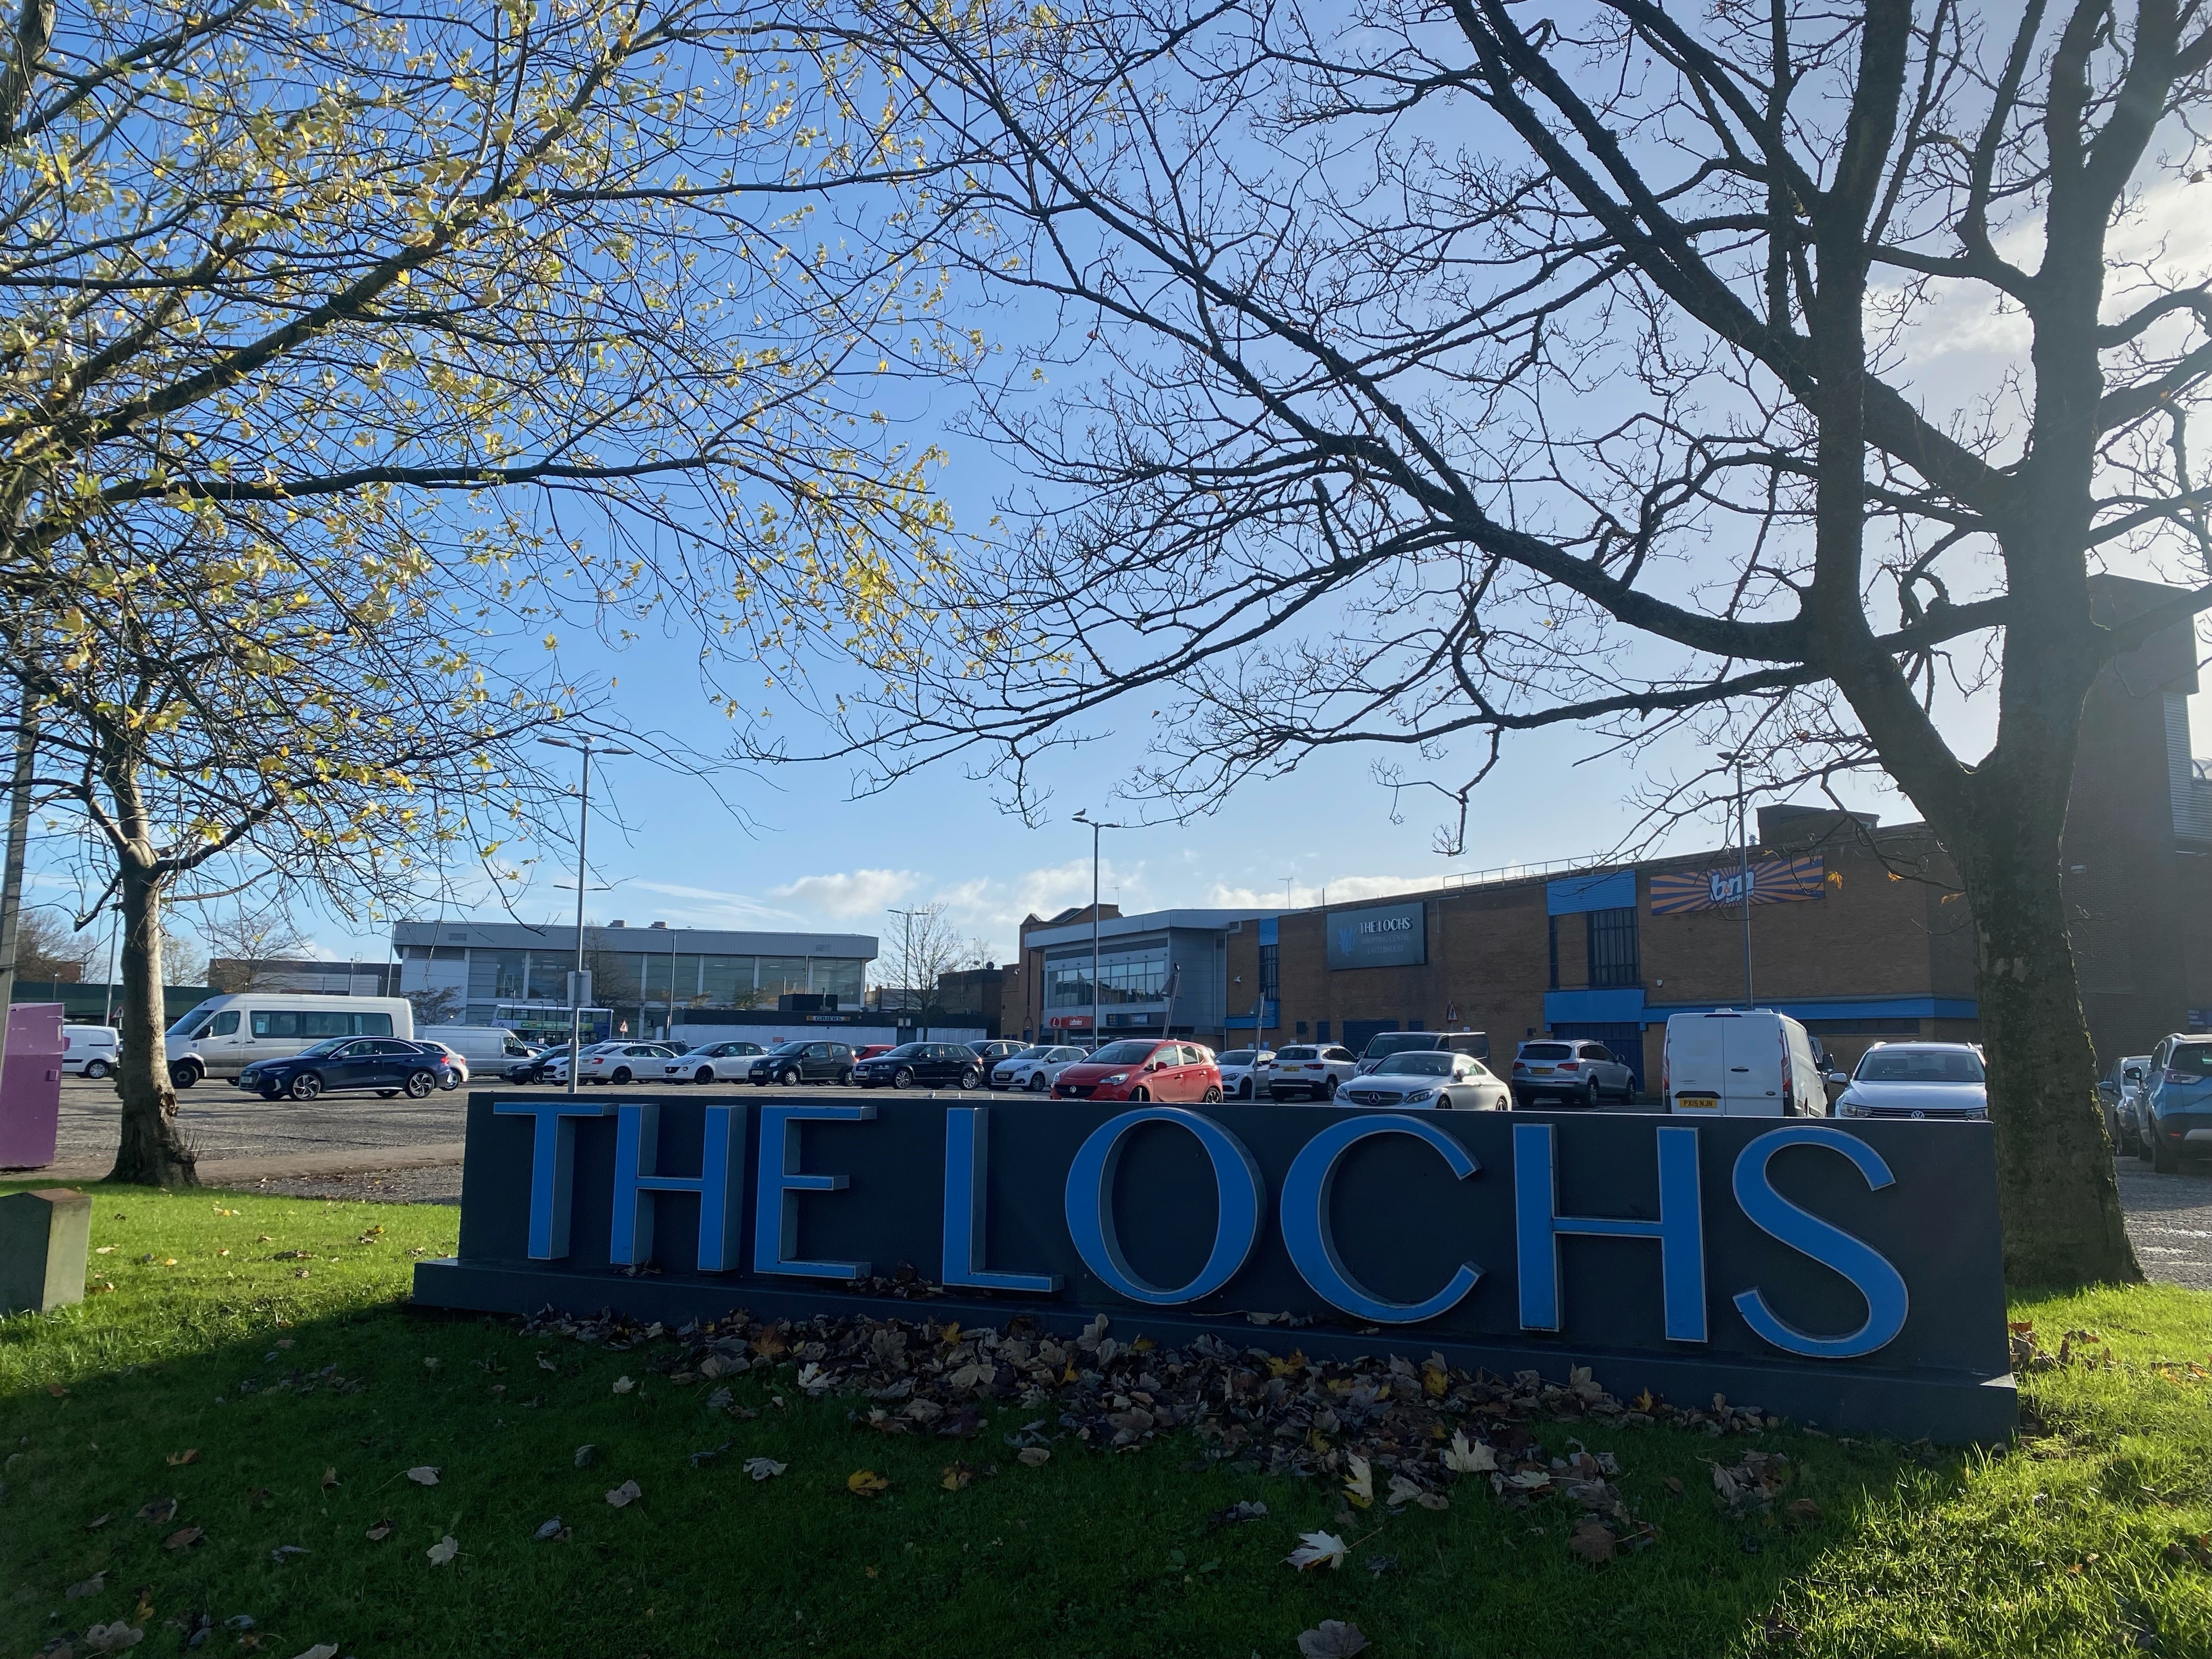 The Lochs shopping centre in Easterhouse.